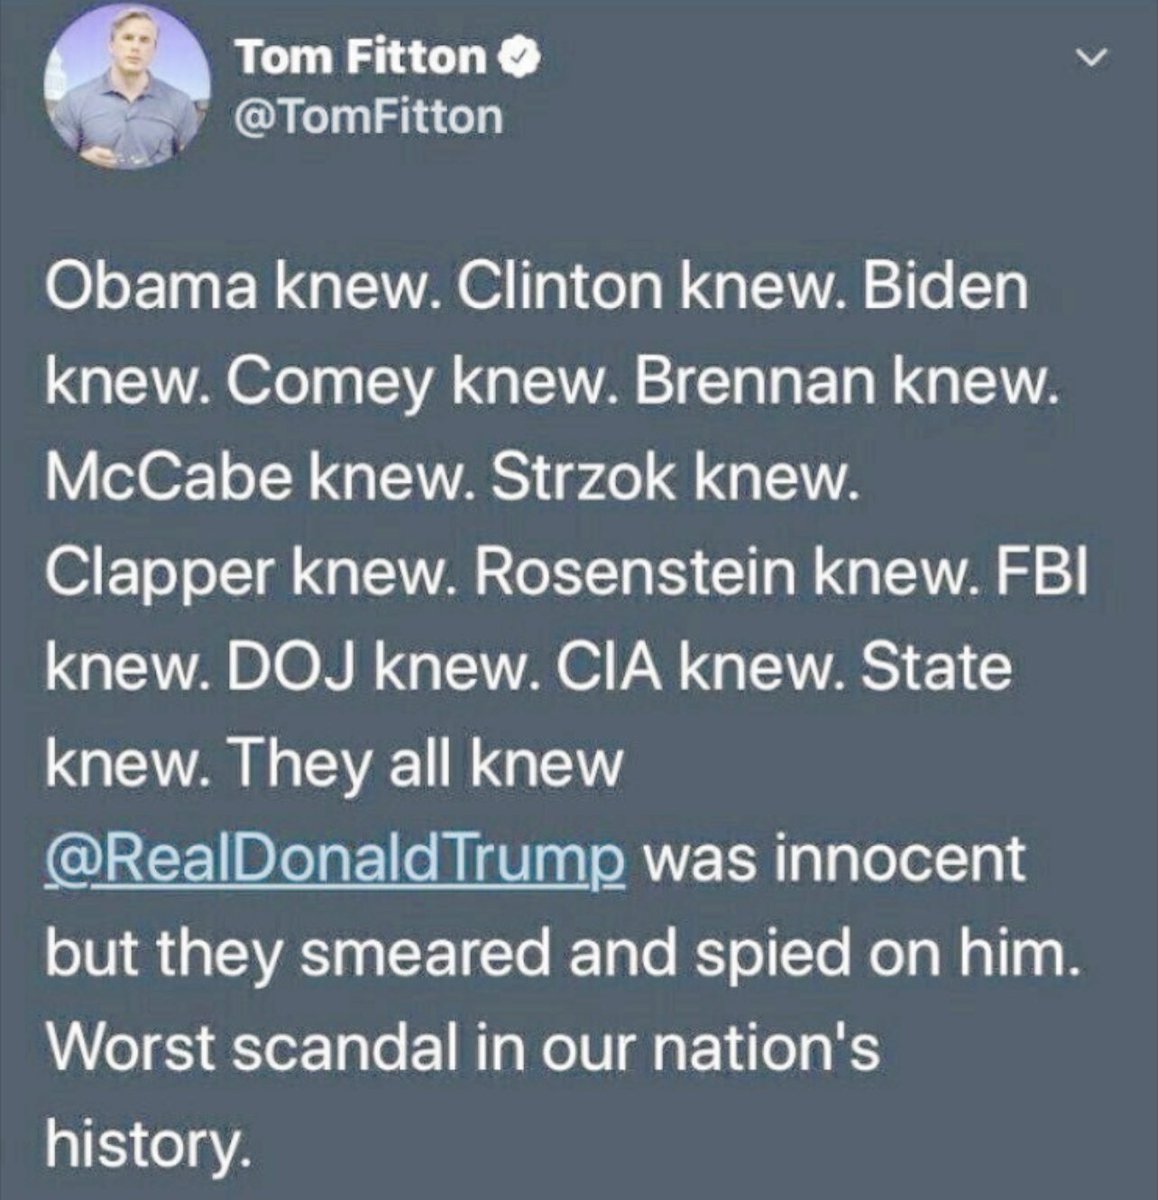 The Democrat Party is guilty in a coup de’ tat and the biggest scandal in our nation’s history! 

In order to move forward as a country and to Make America Great Again , all these people need to be tried for treason. 

Who agrees with Tom? 👇🙋‍♂️